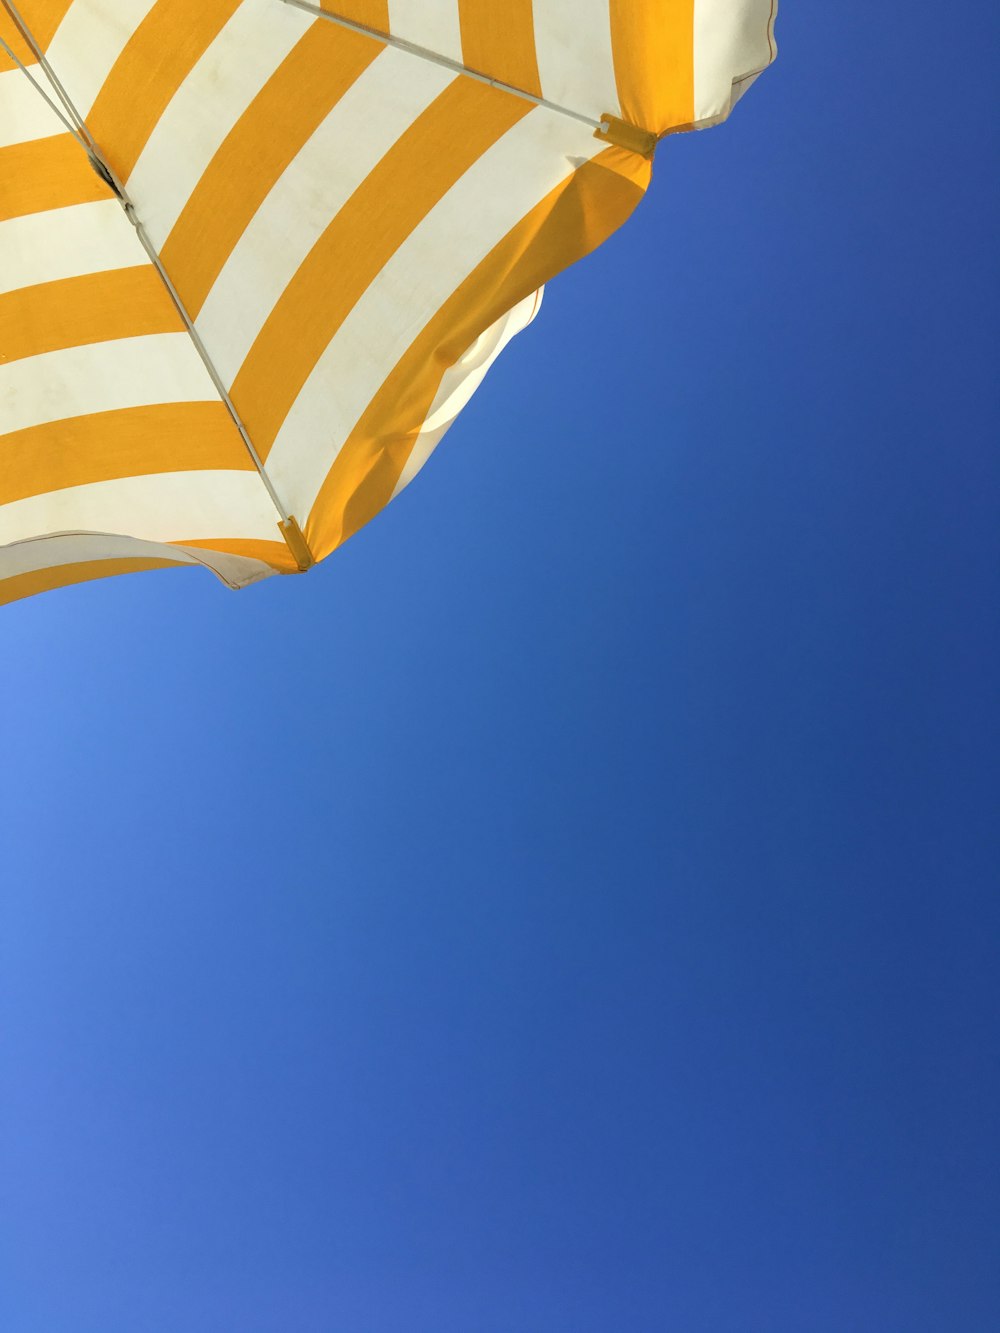 a yellow and white striped umbrella against a blue sky